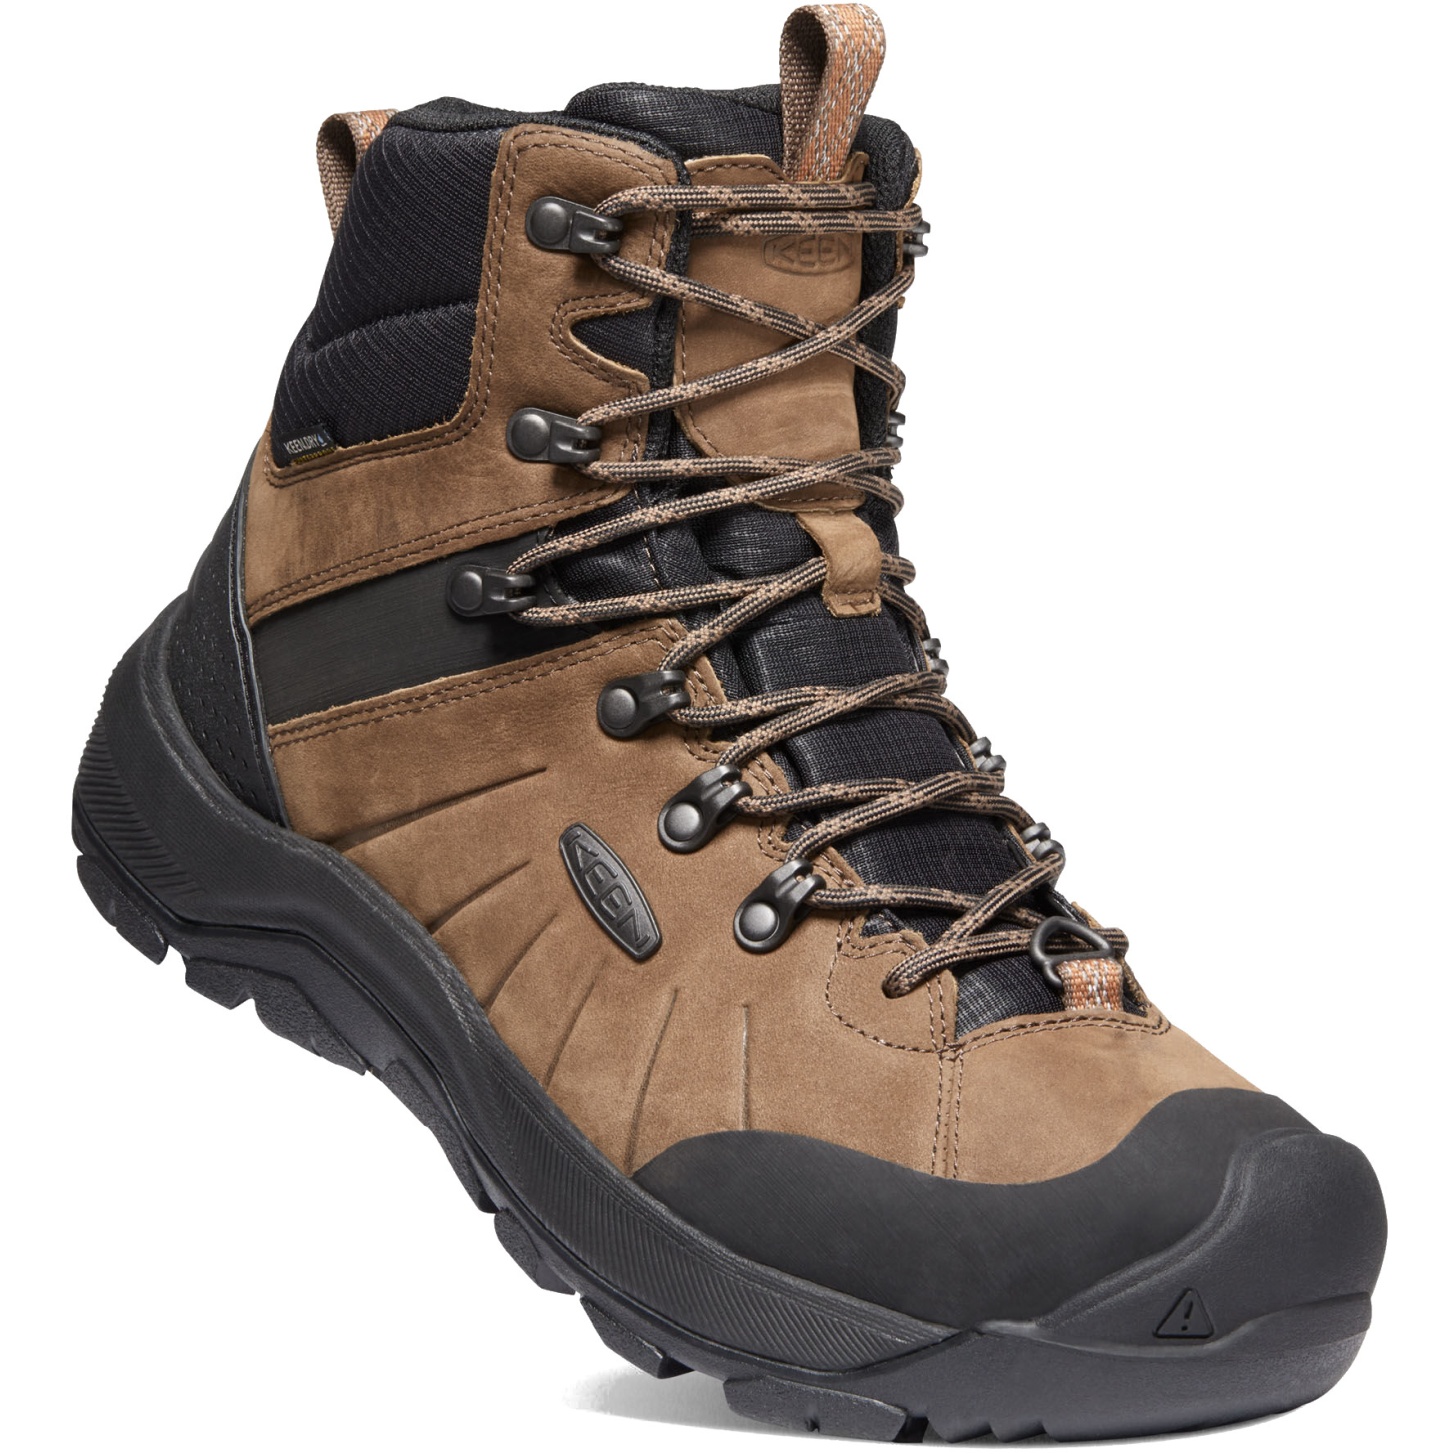 Picture of KEEN Revel IV Mid Polar Boots - Dark Earth/Caramel Cafe